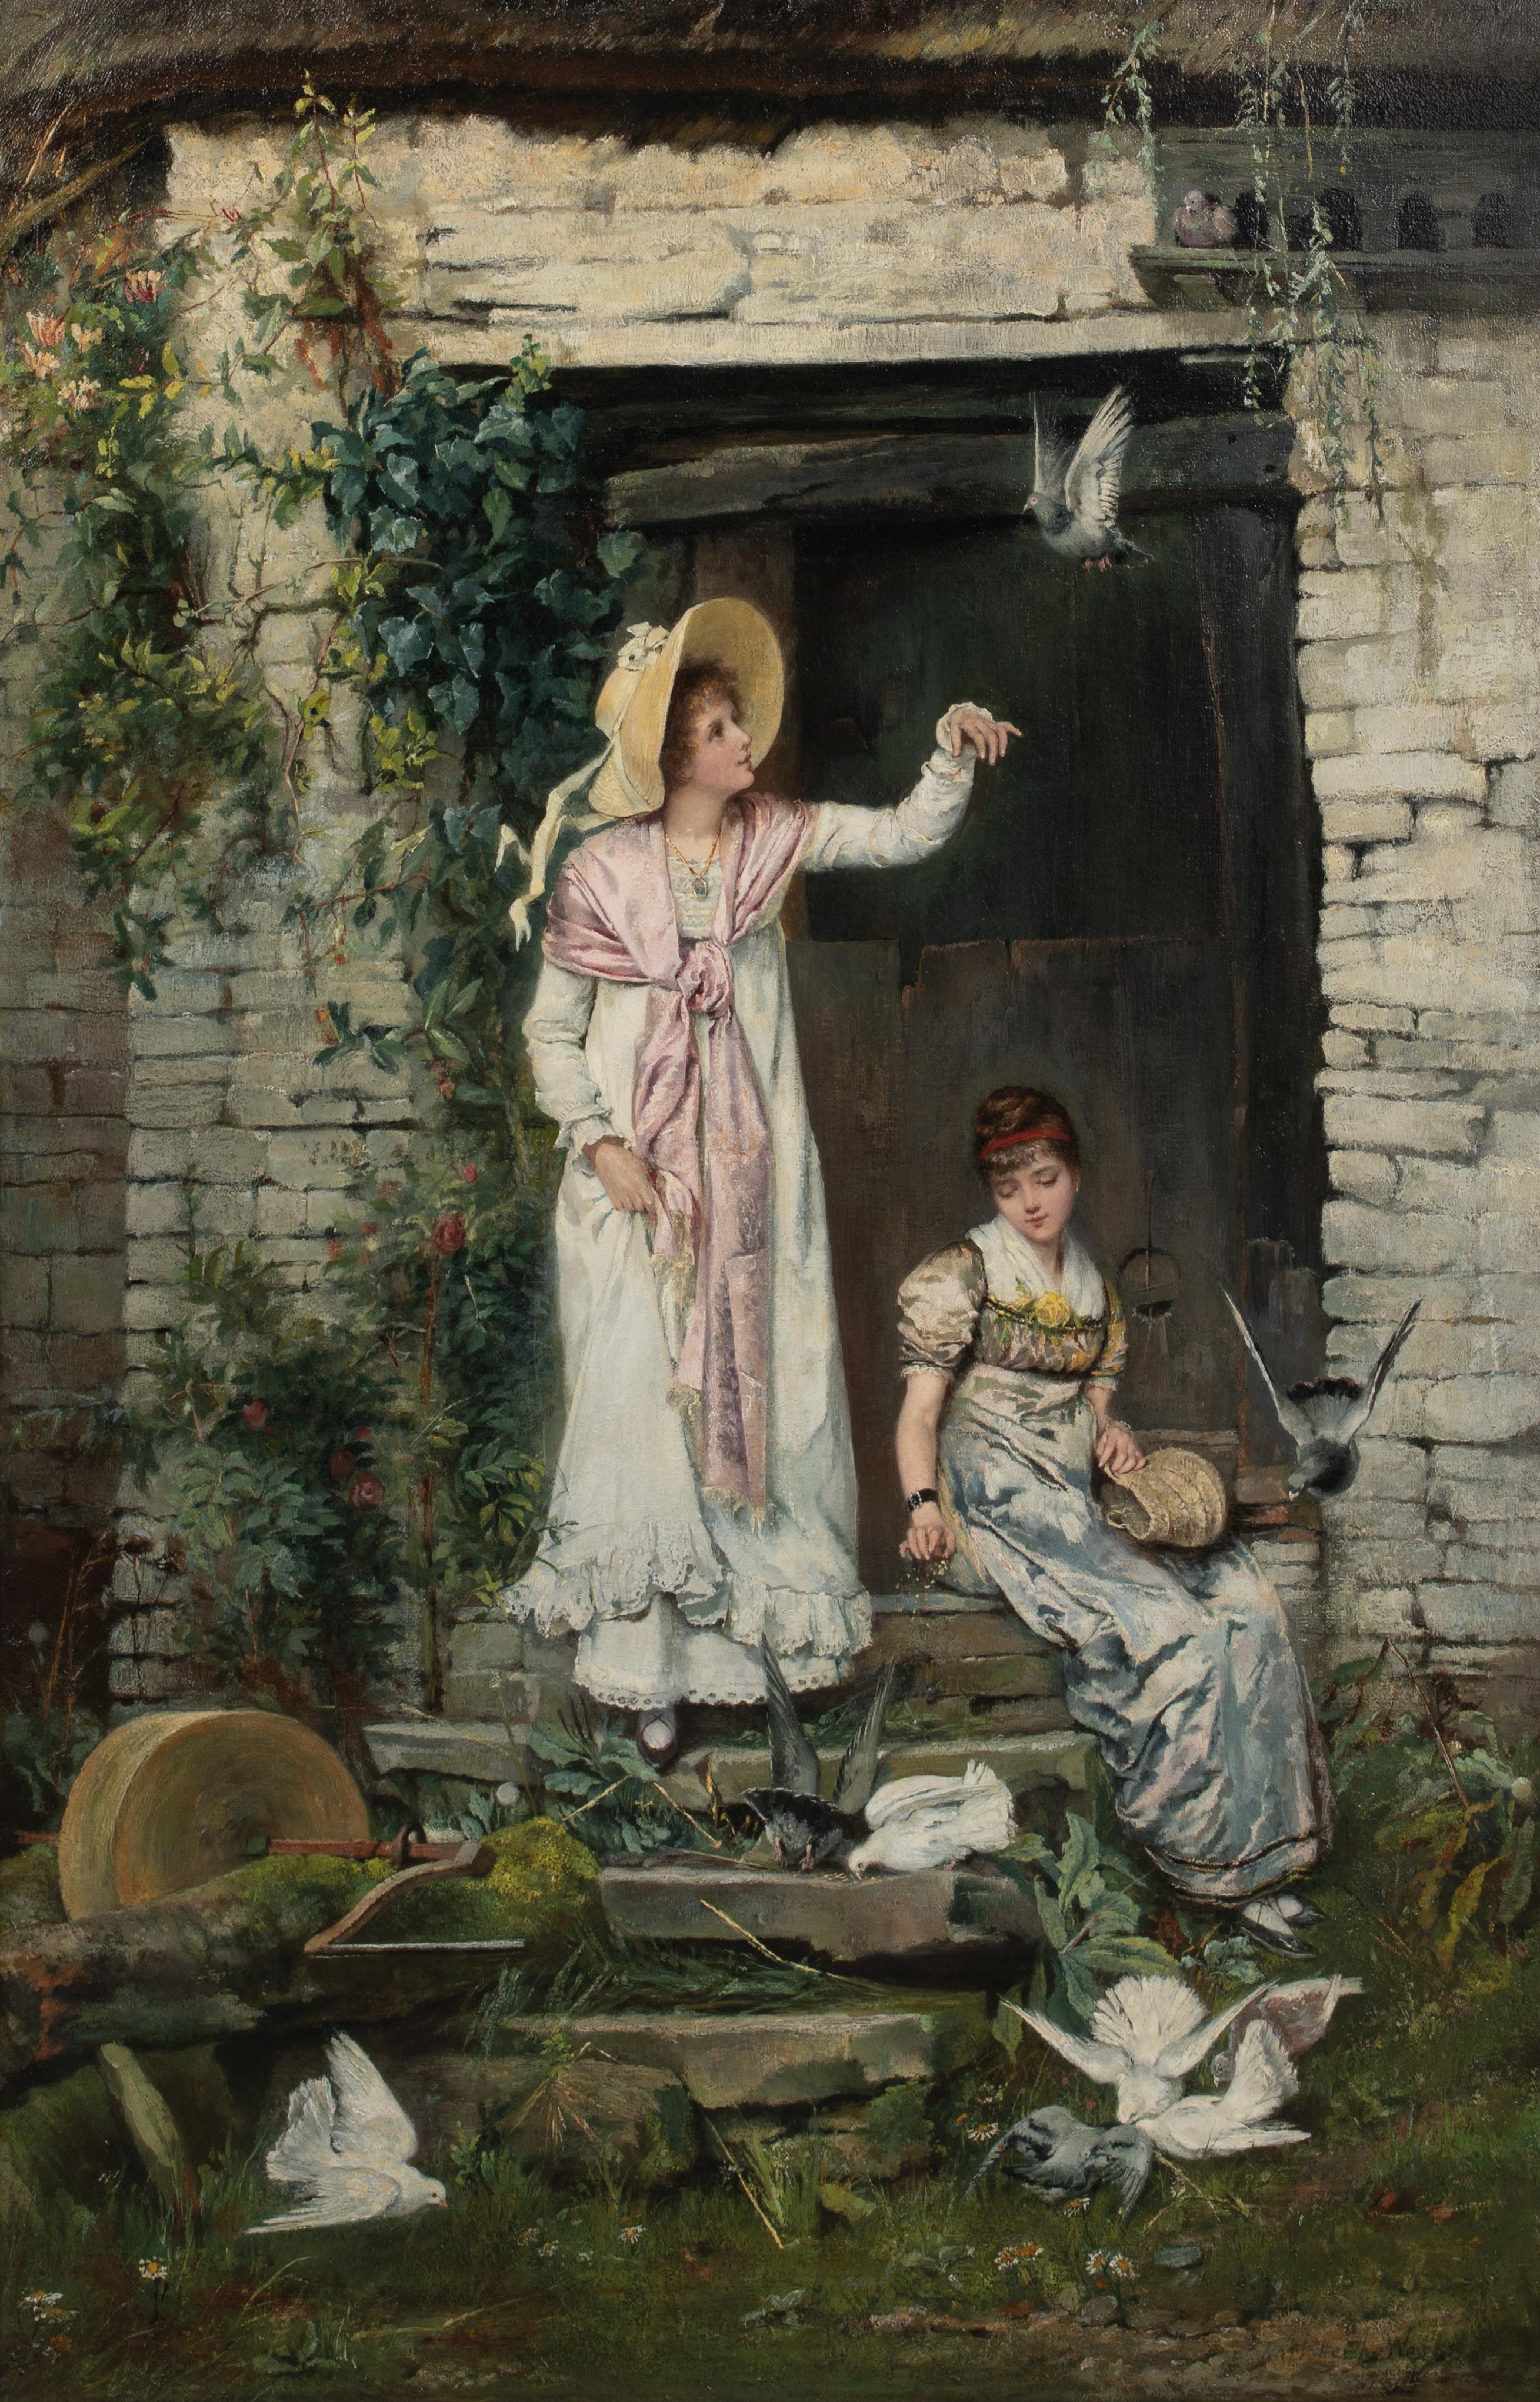 Feeding The Birds, 19th Century

by Charlotte J Weeks (19th Century, British)

Large 19th Century English scene of two ladies feeding birds, oil on canvas by Charlotte J Weeks. Excellent quality and condition genre scene of two young ladies in their